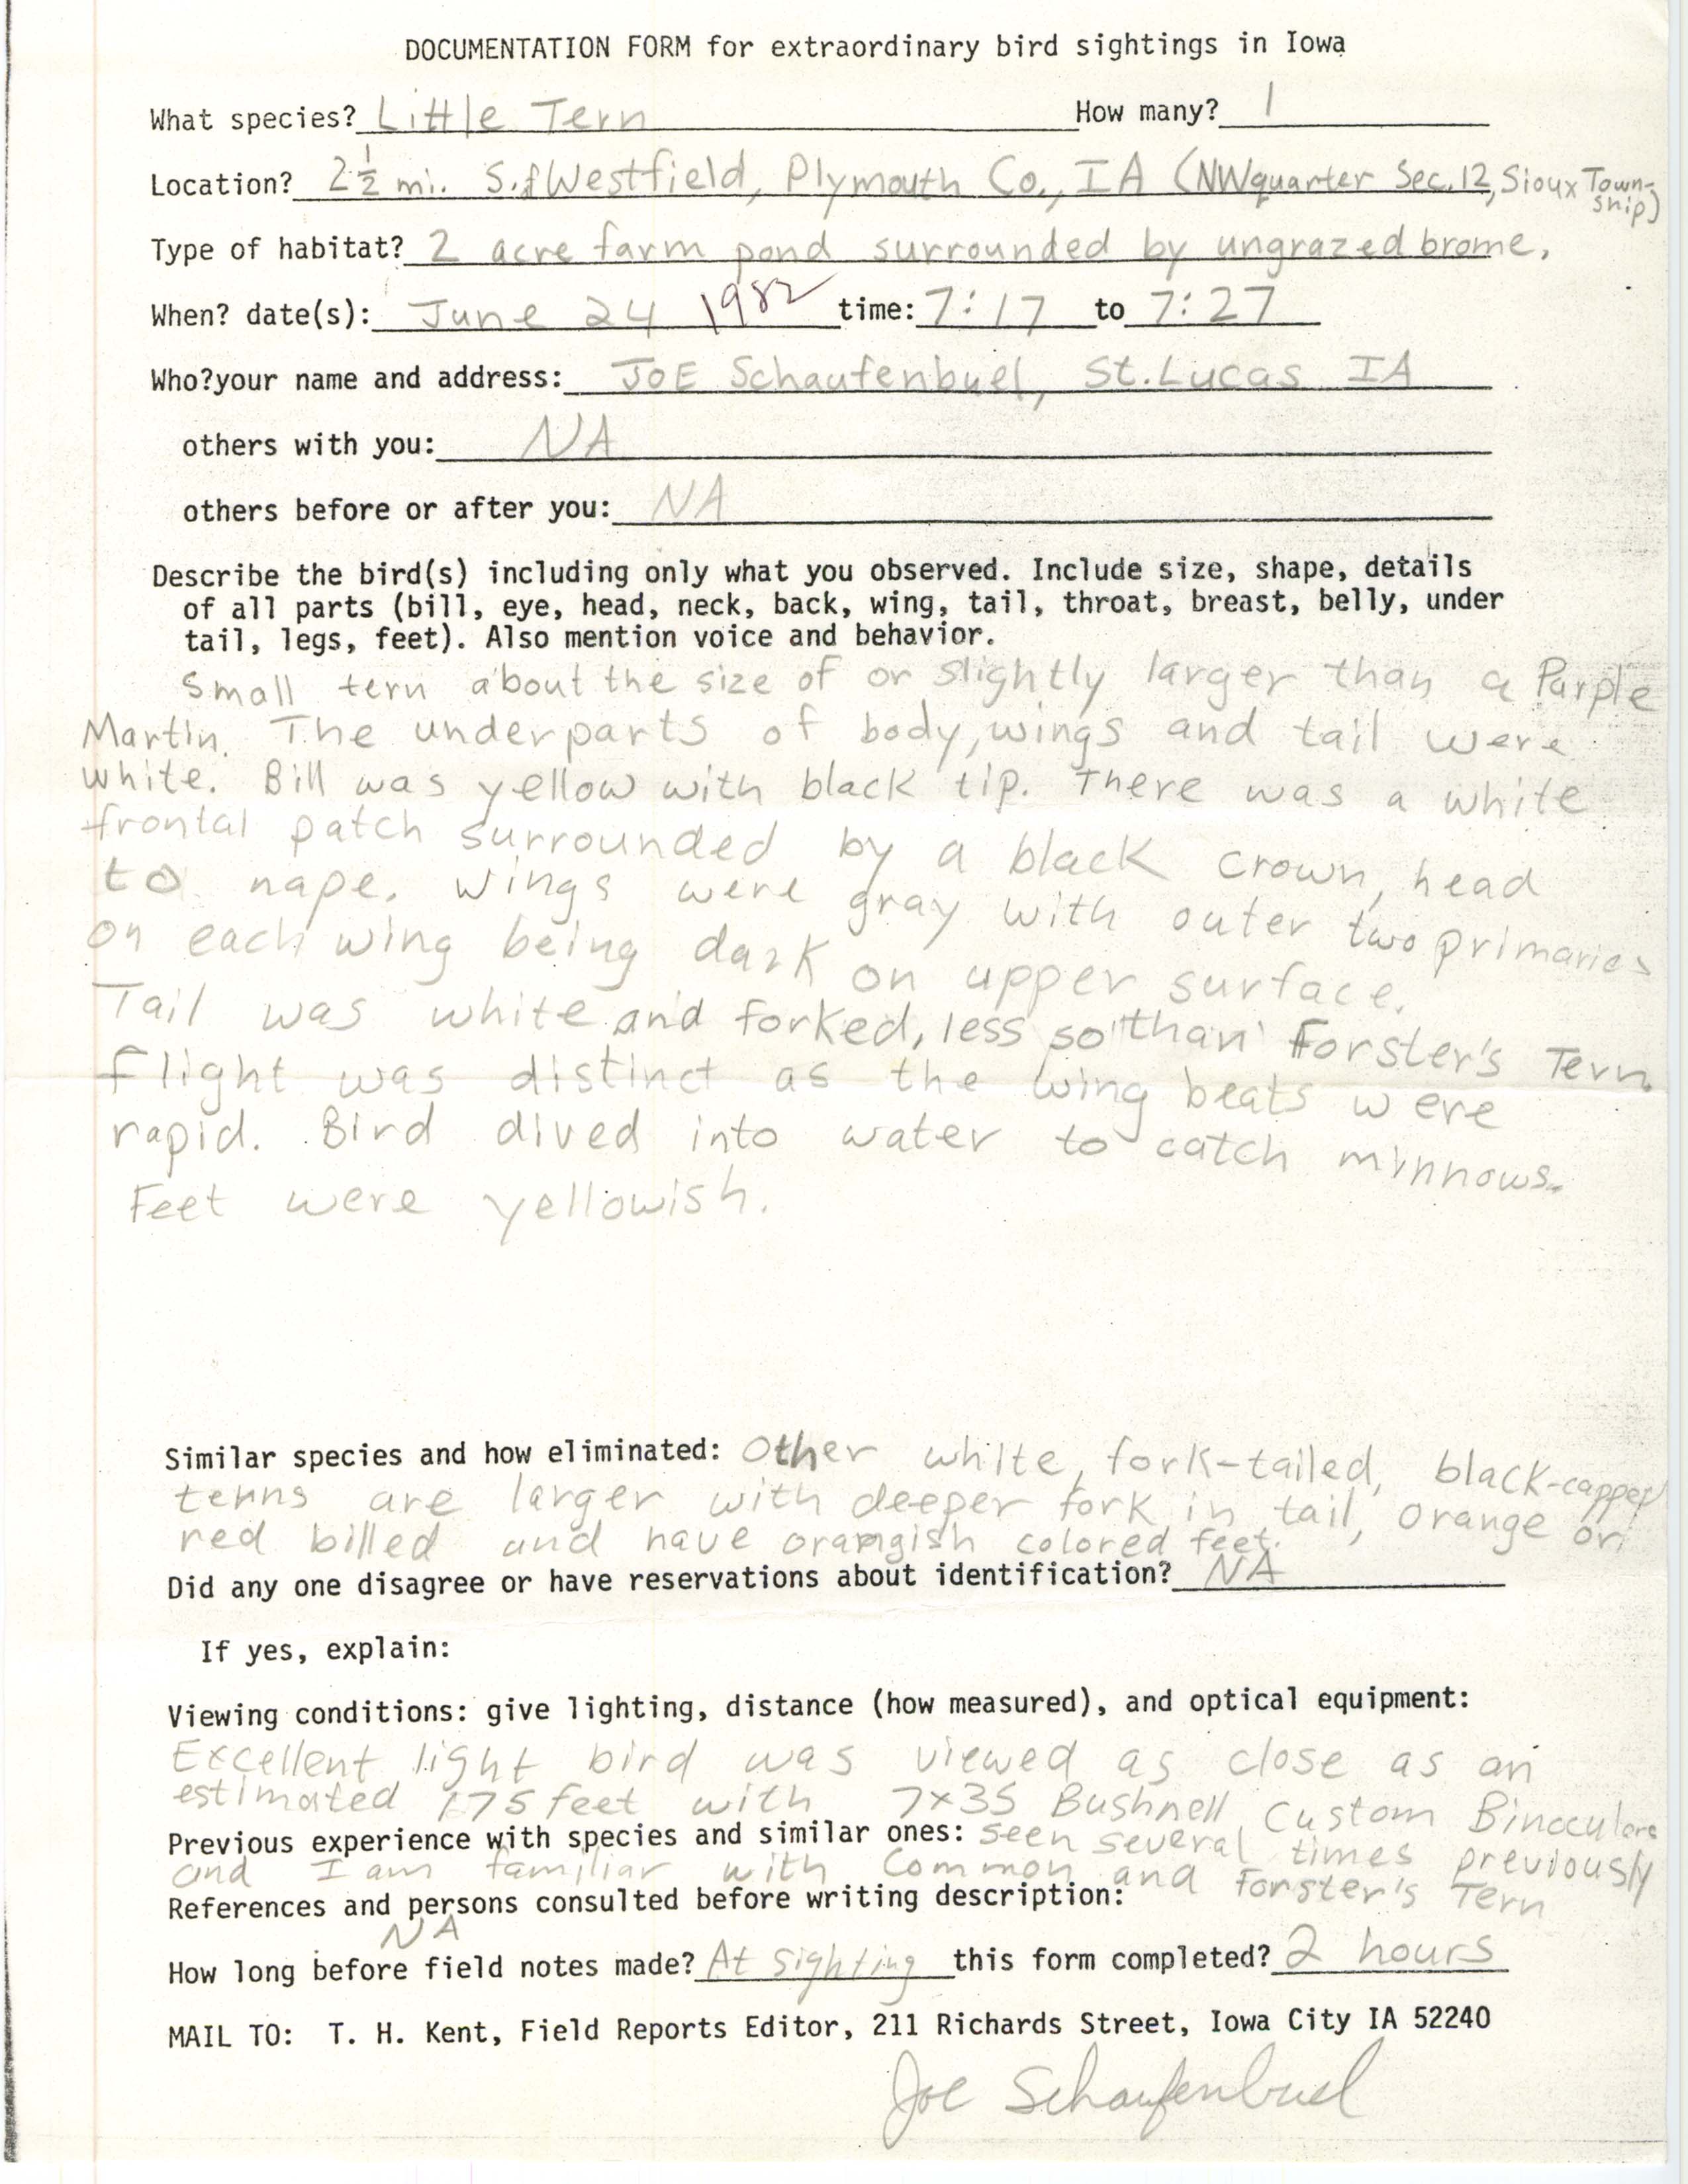 Rare bird documentation form for Little Tern south of Westfield, 1982